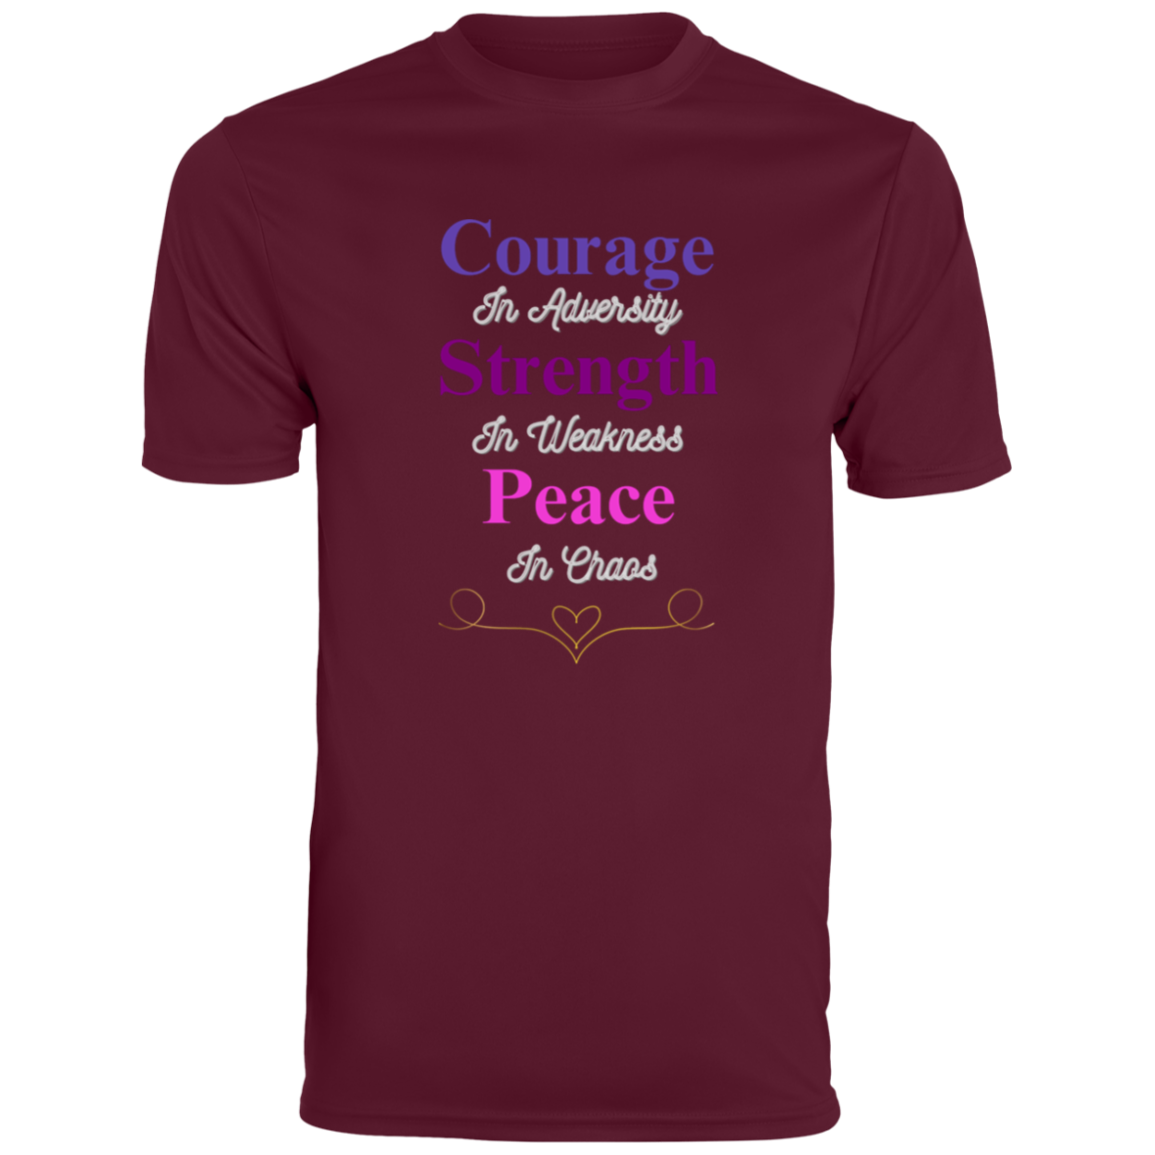 Courage In Adversity Men's T-Shirt| Men's Ultra-Breathable Moisture-Wicking Fabric T-Shirt| Short Sleeve